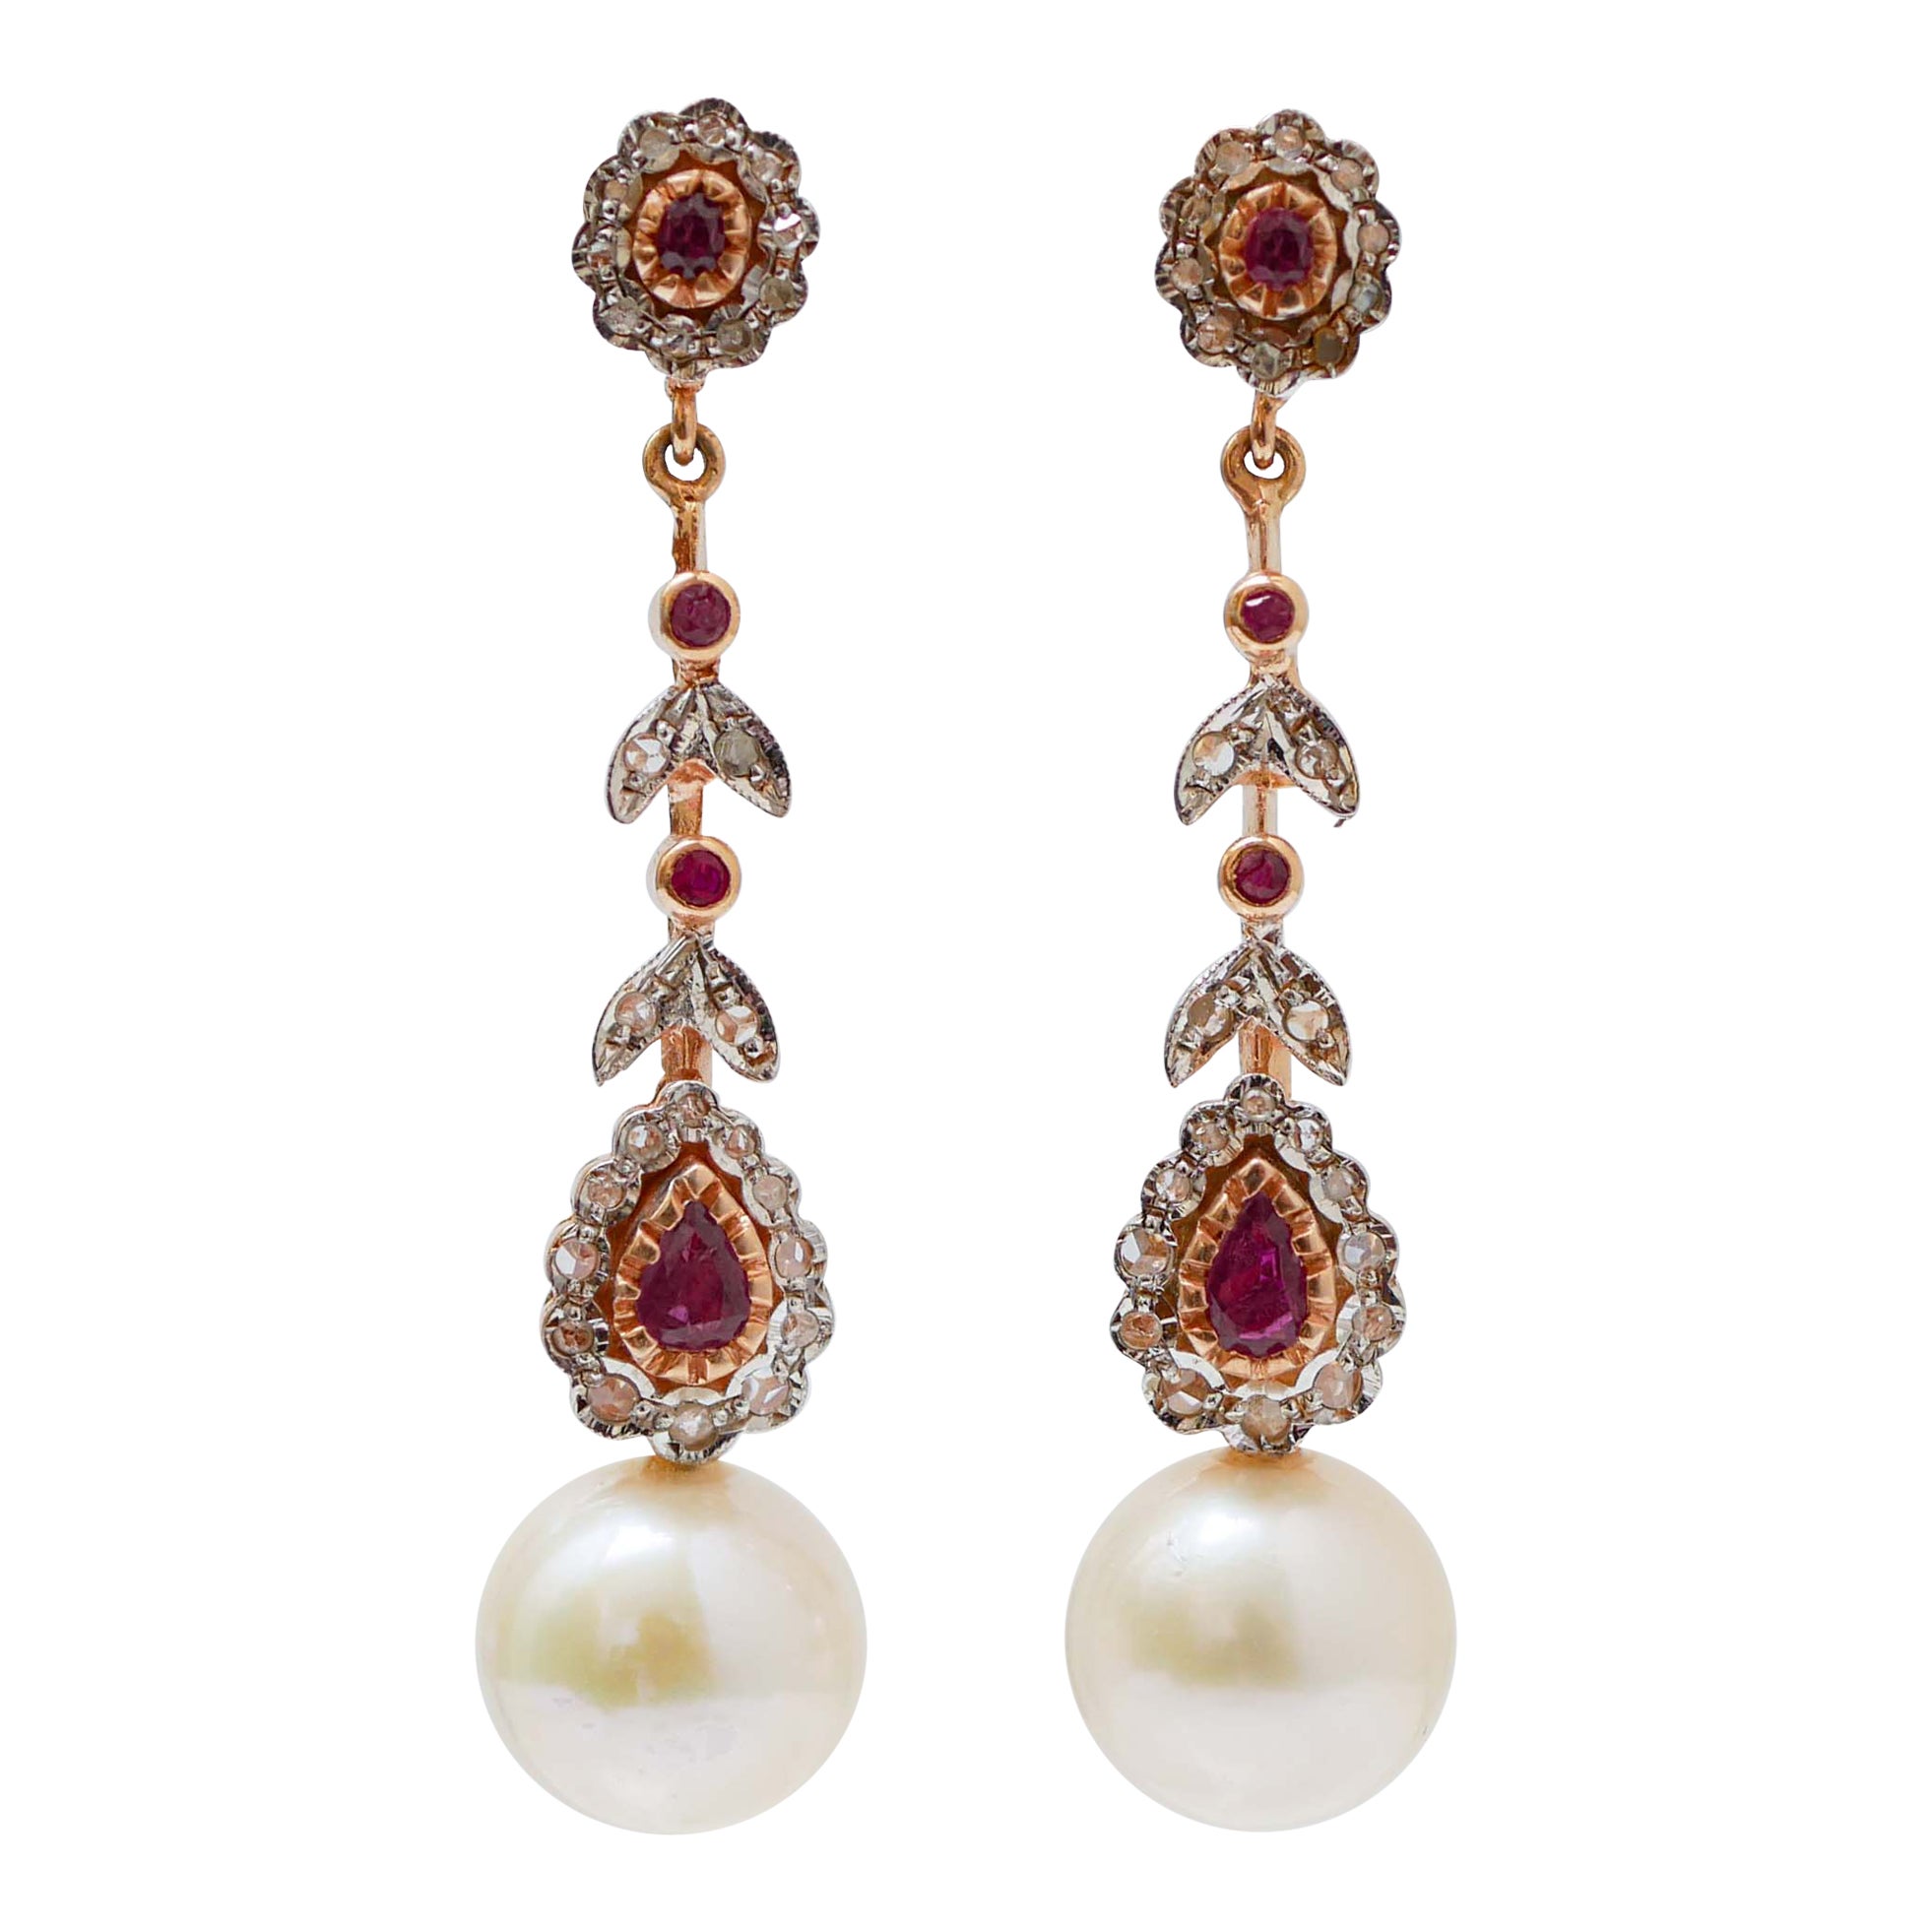 White Pearls, Rubies, Diamonds, Rose Gold and Silver Dangle Earrings. For Sale